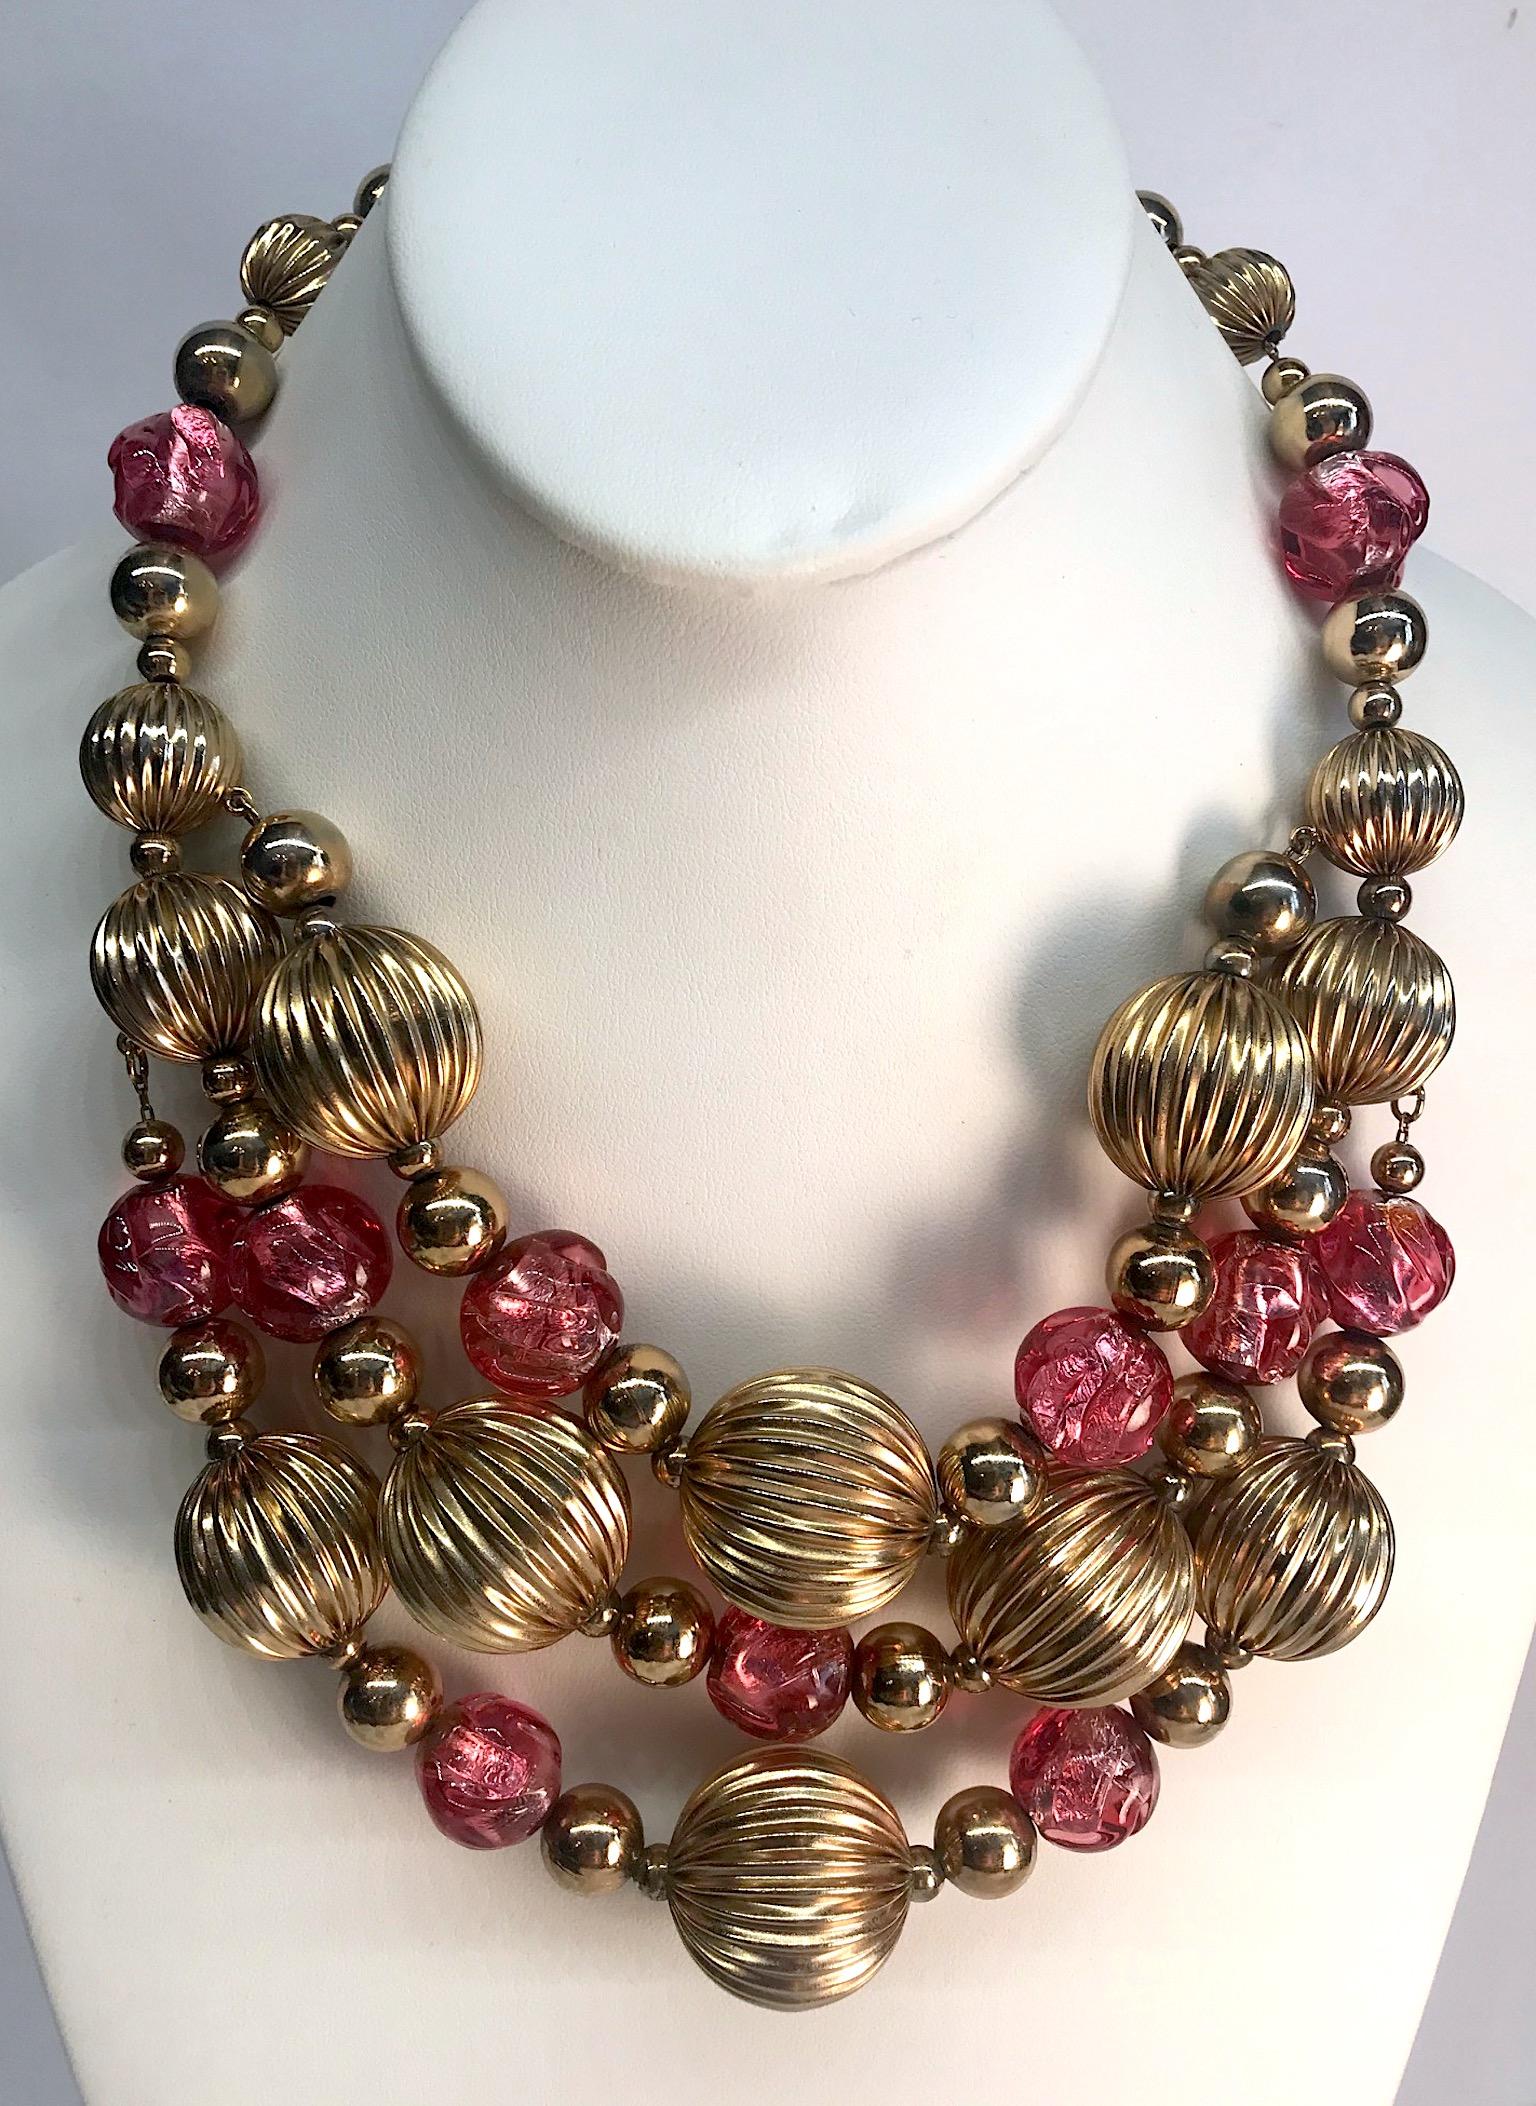 A lovey 1950s bib necklace from the American fashion jewelry company Napier. The front is bib style with three strands of gold plate and glass beads that meet a a single stand on each side. The largest gold ribbed beads are 25 mm (1 inch diameter)